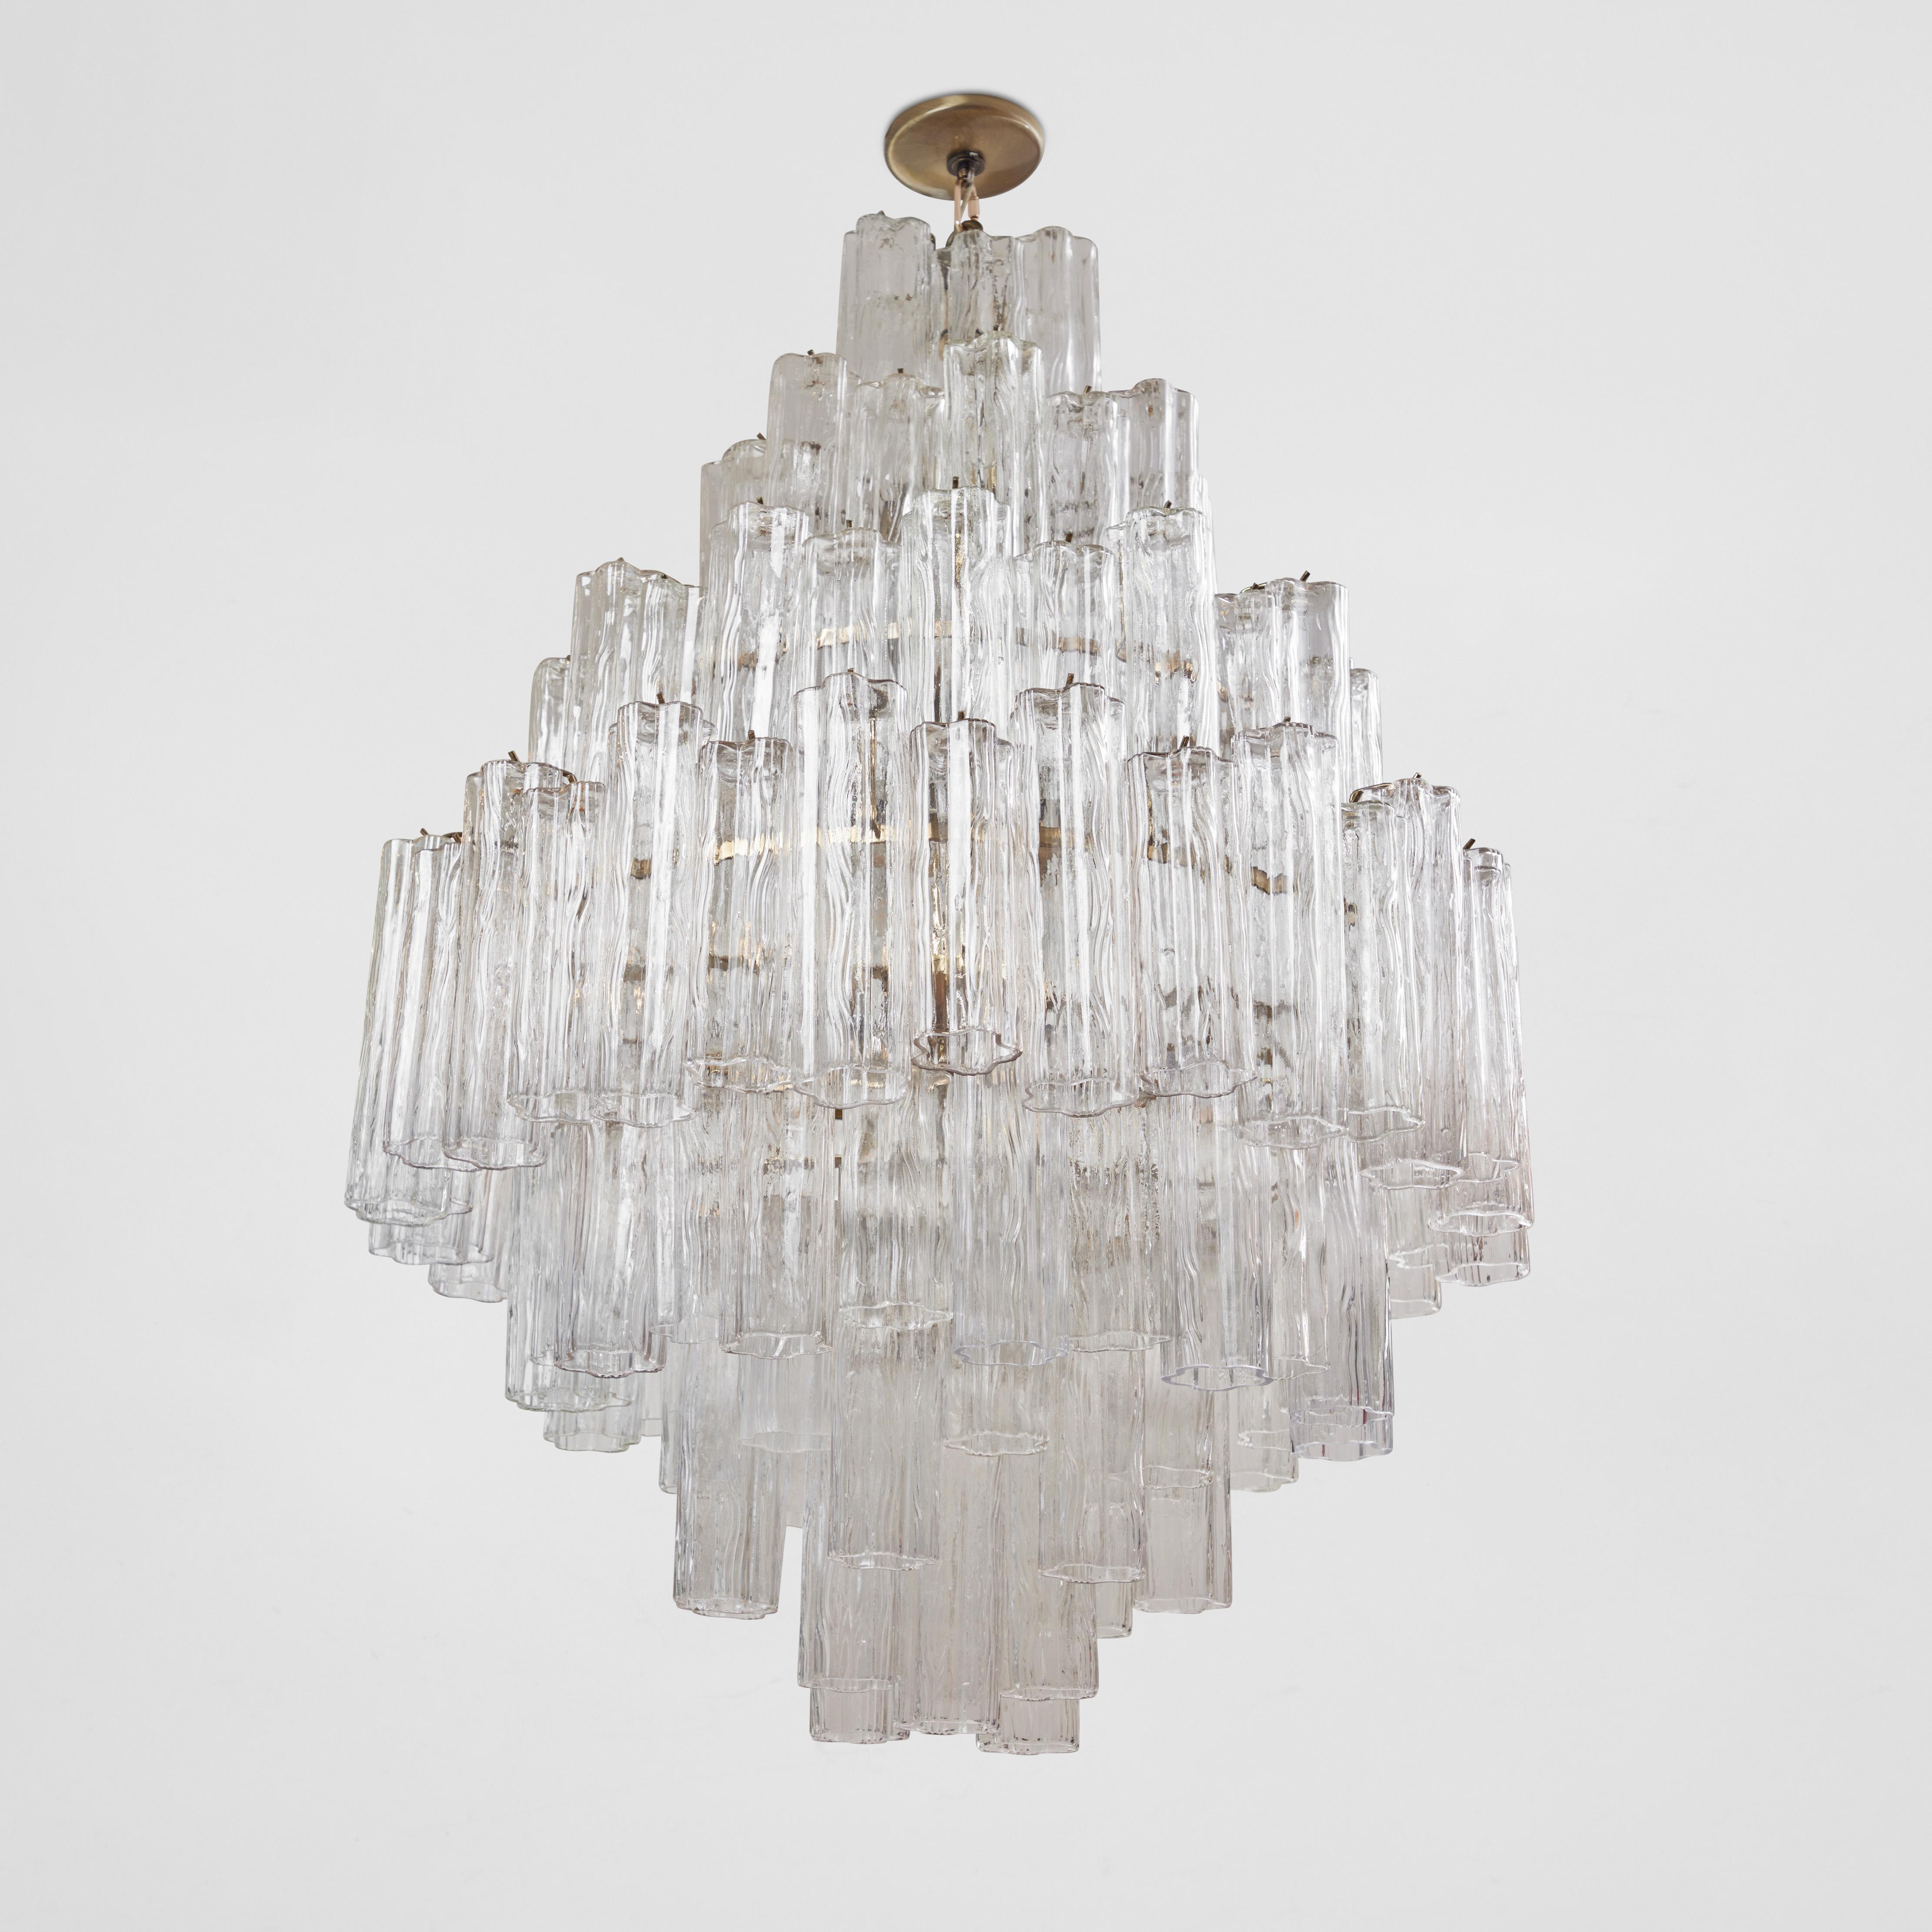 Plated A Vintage 7 Tiered Tronchi Chandelier Attributed to Venini